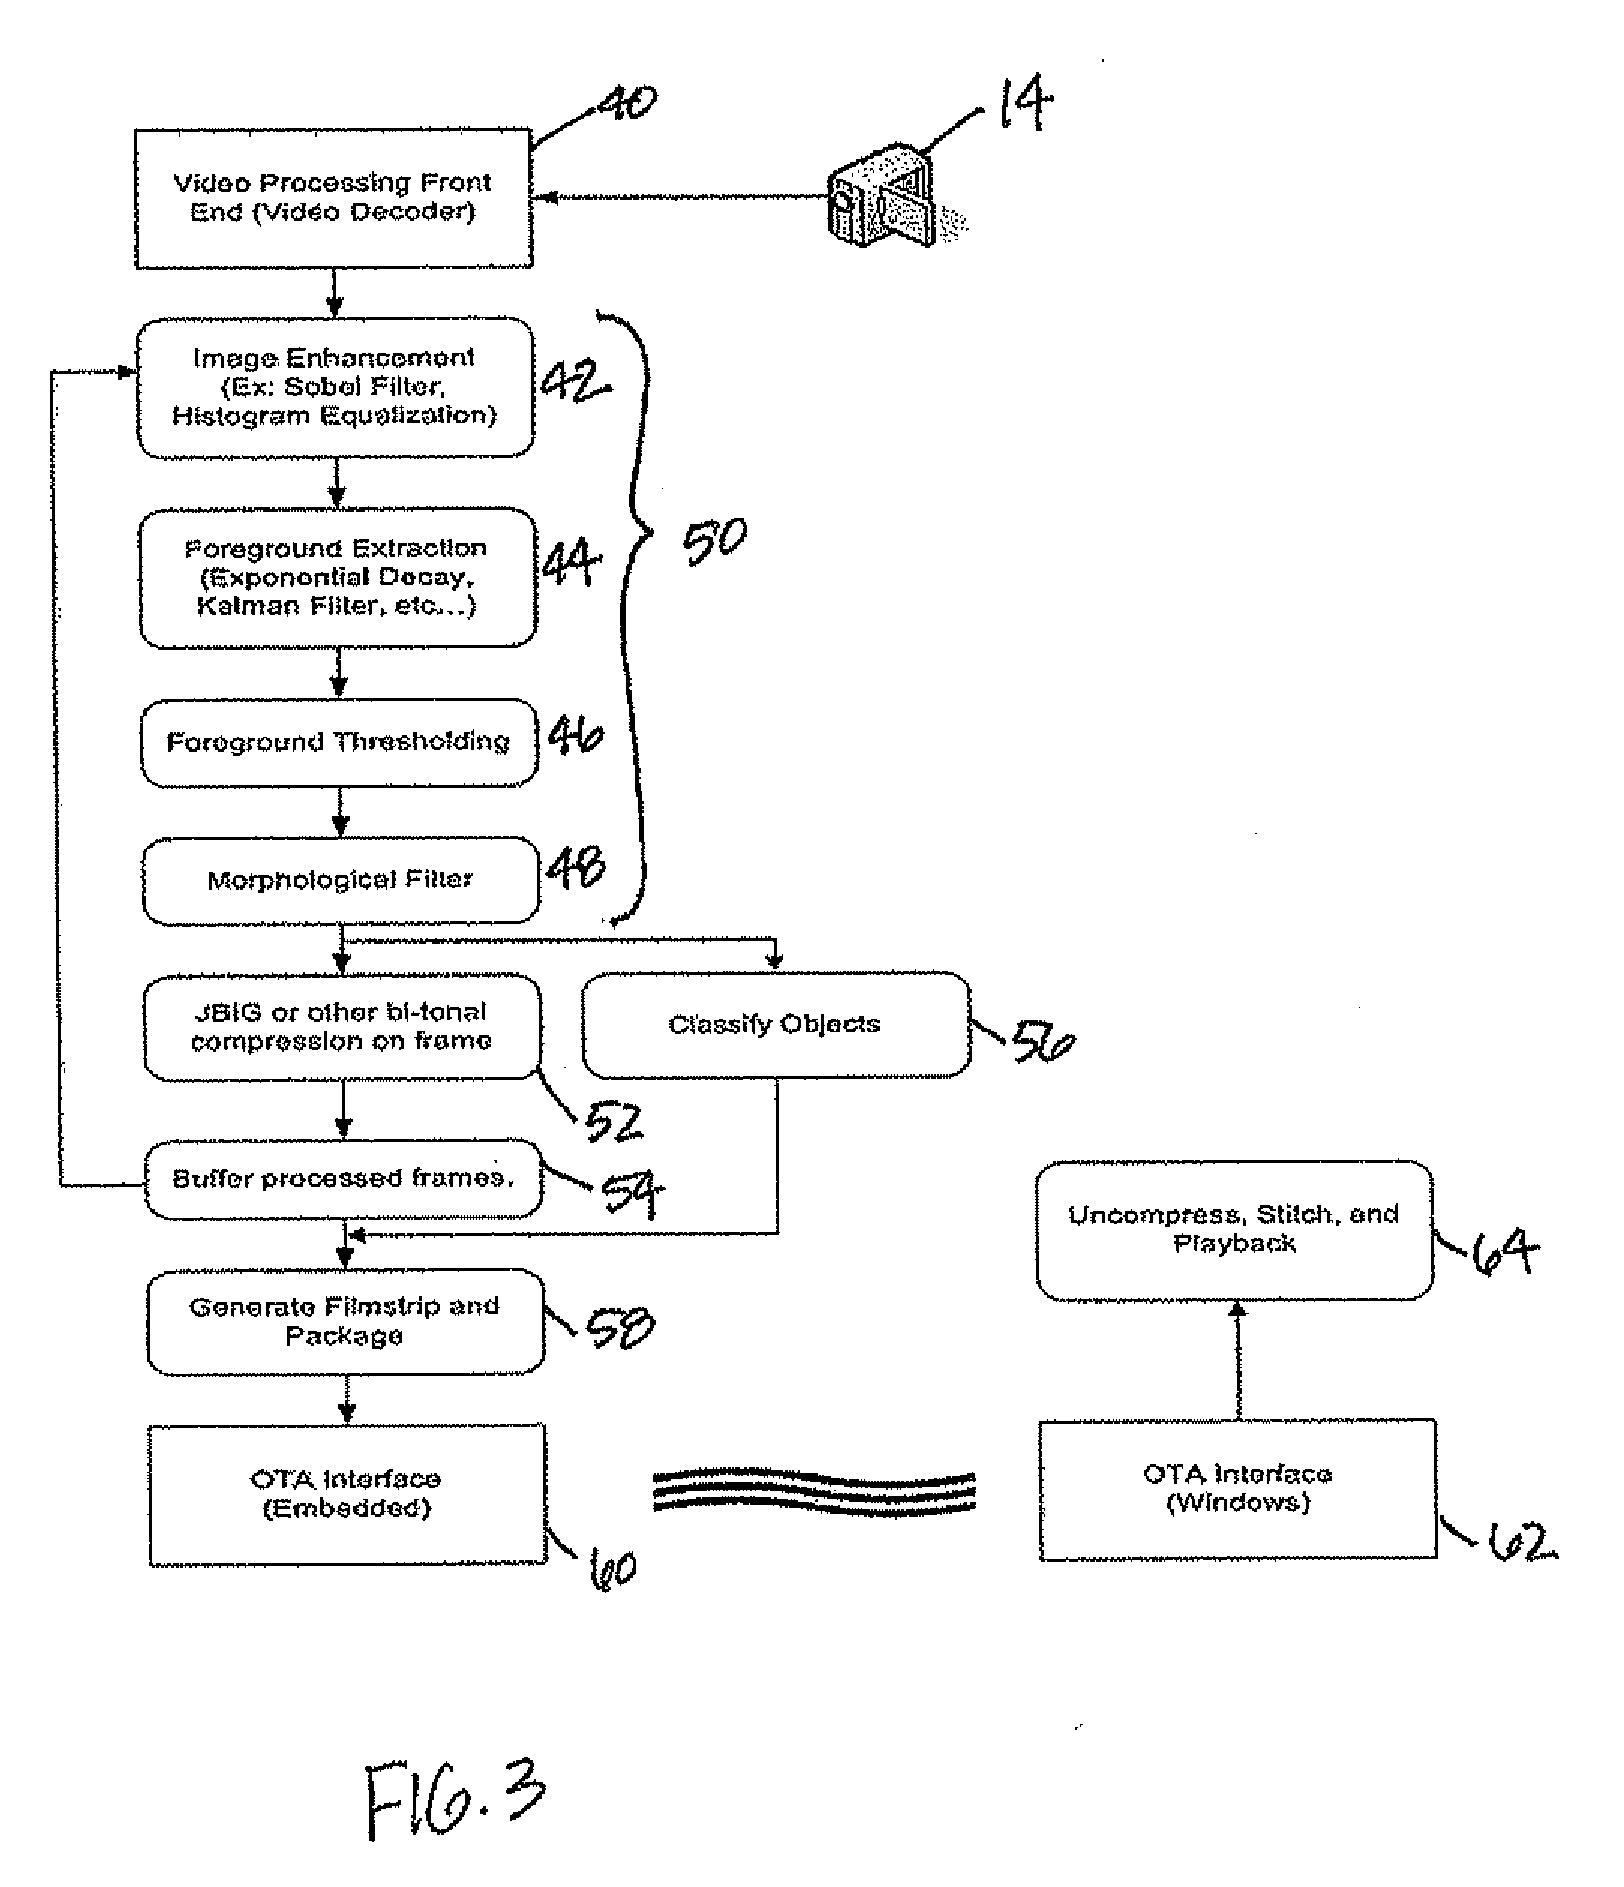 Unattended surveillance device and associated methods